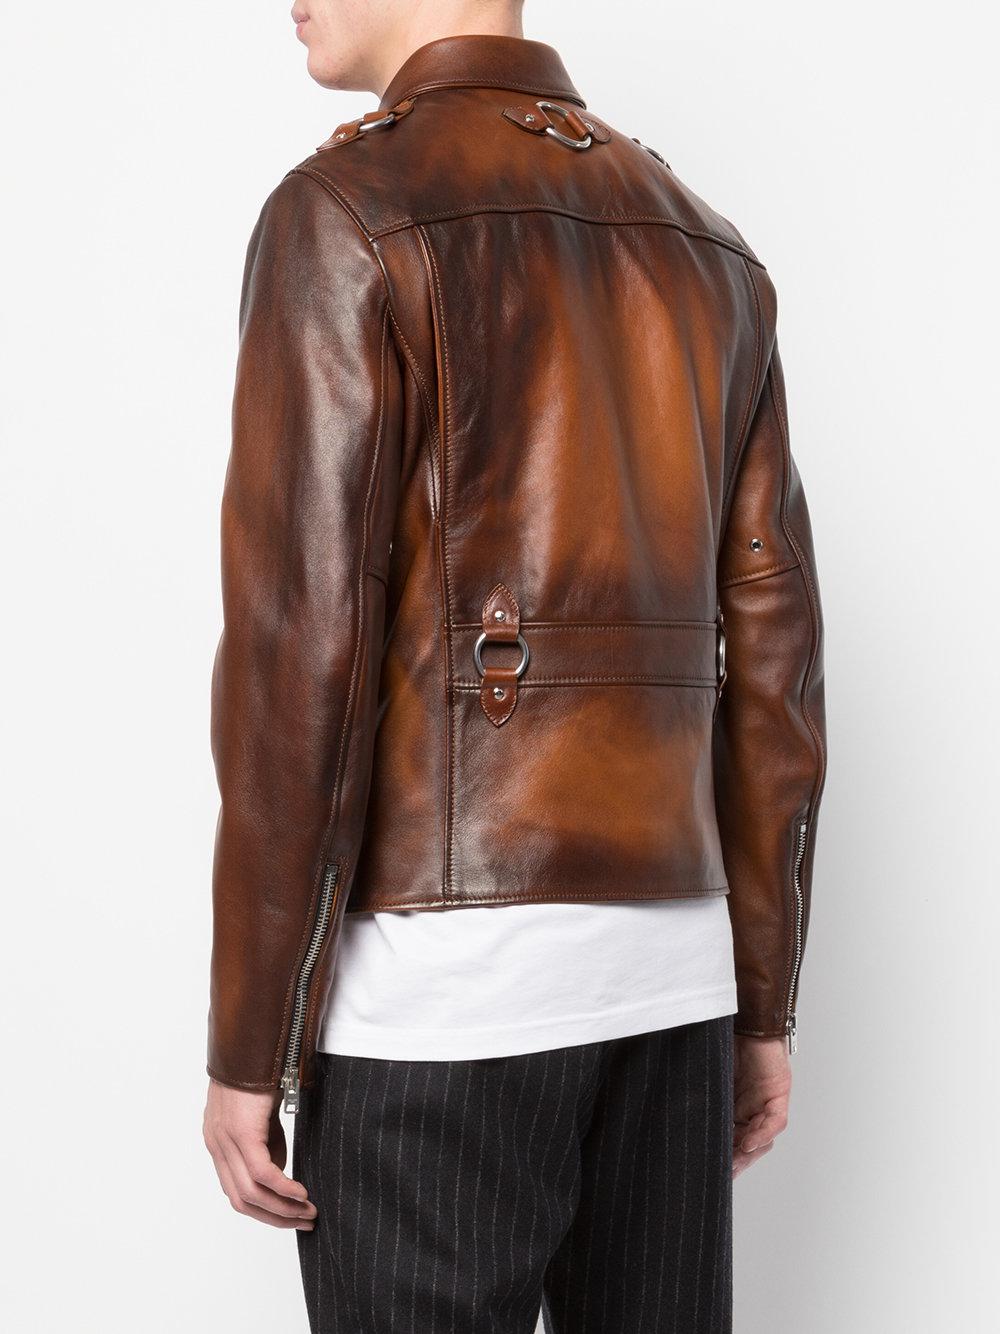 COACH Sheriff Leather Jacket in Brown for Men - Lyst